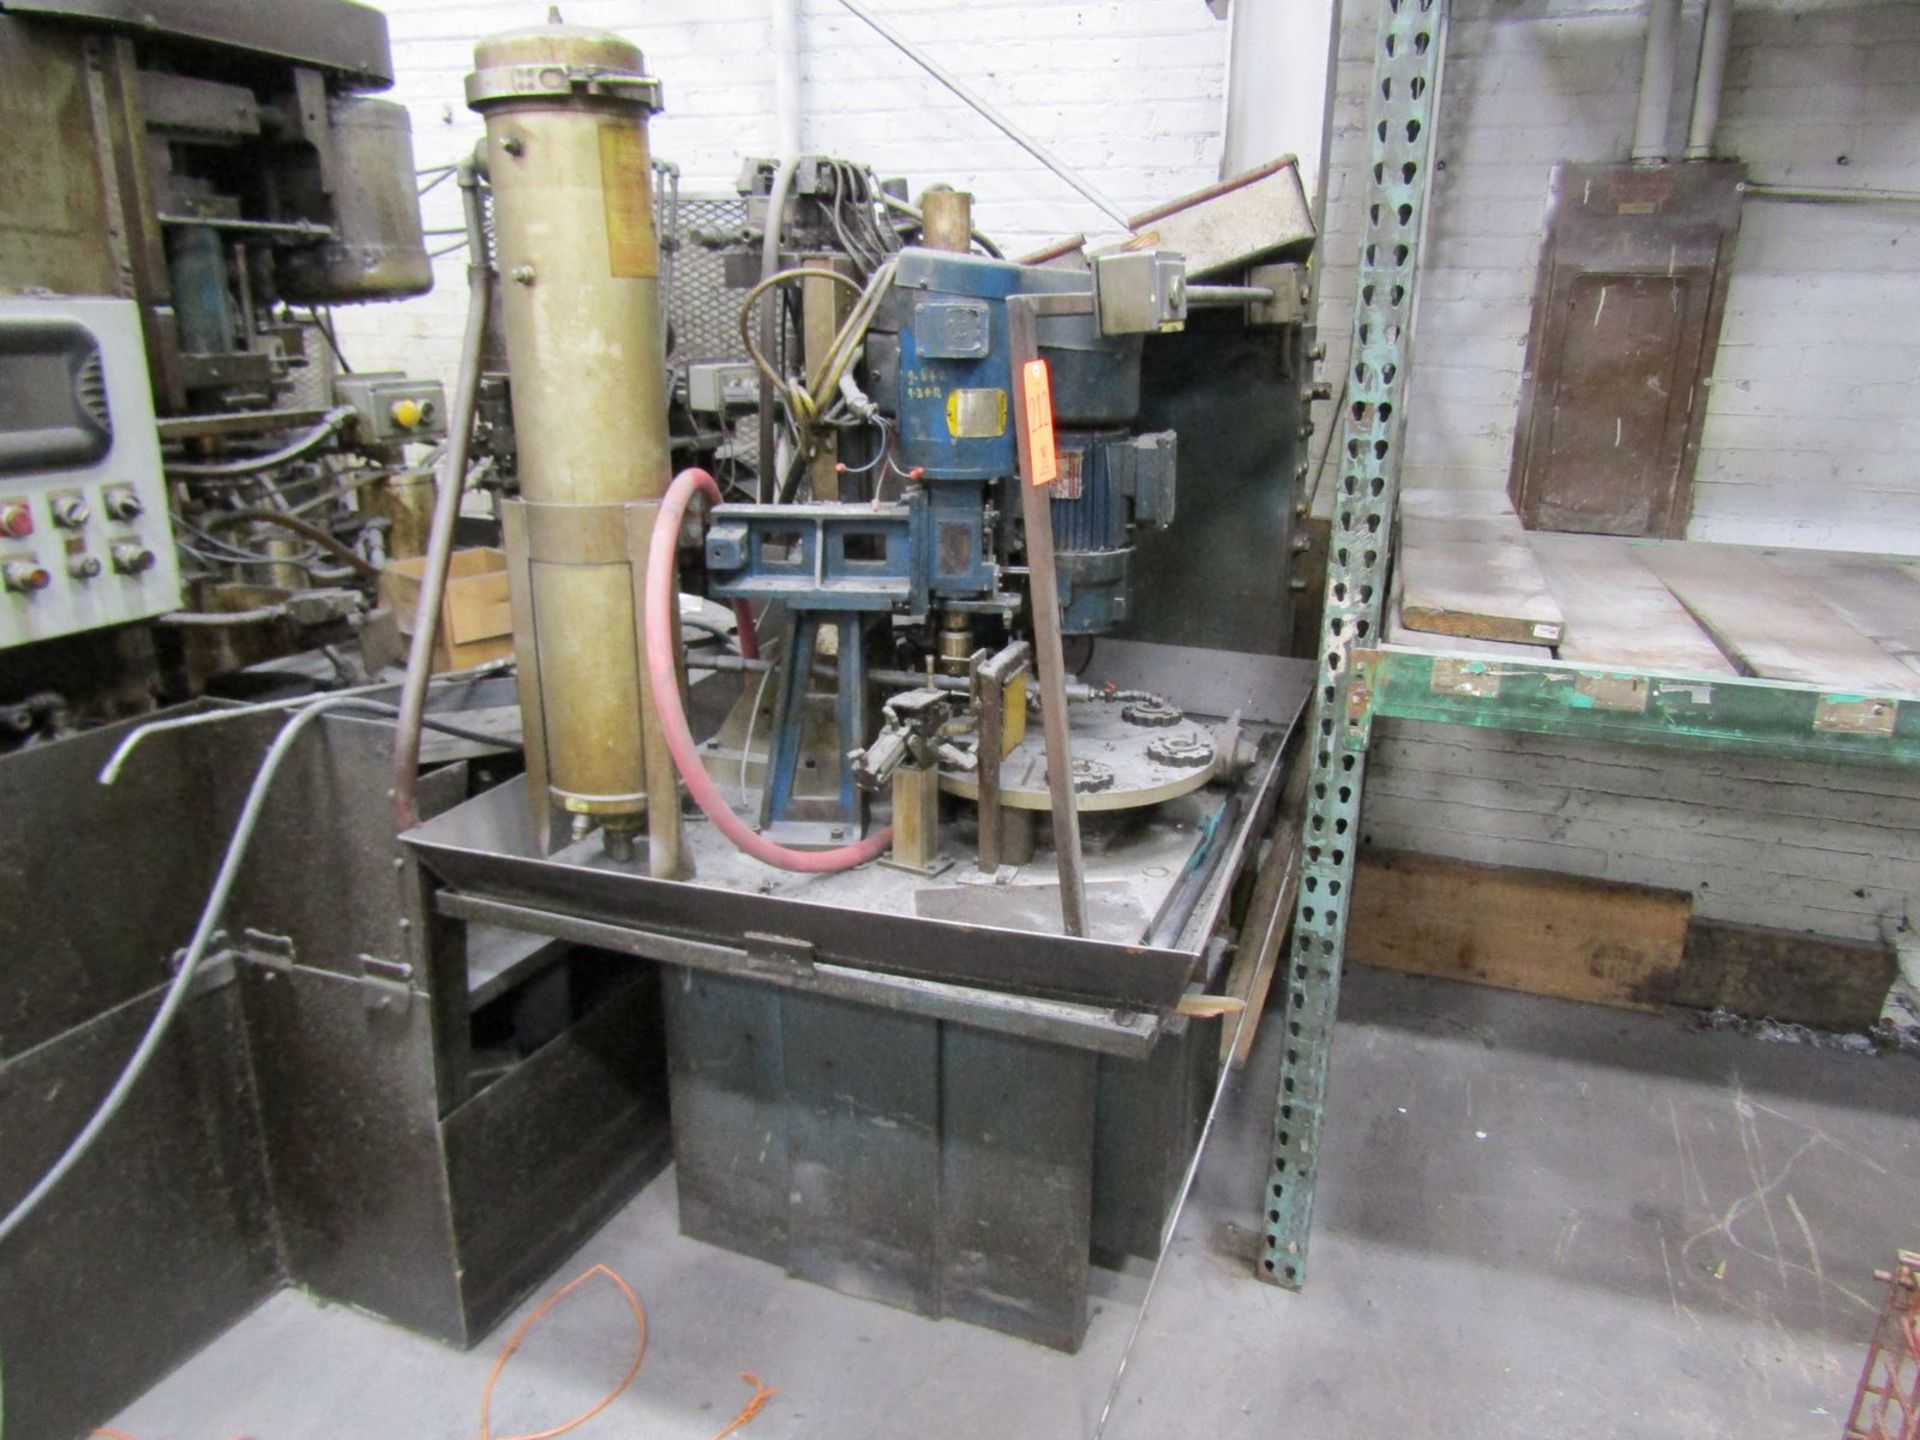 Wisconsin Drill Head "Wis-Matic" 6-Station Rotary Indexing Secondary Operation Drilling & Tapping